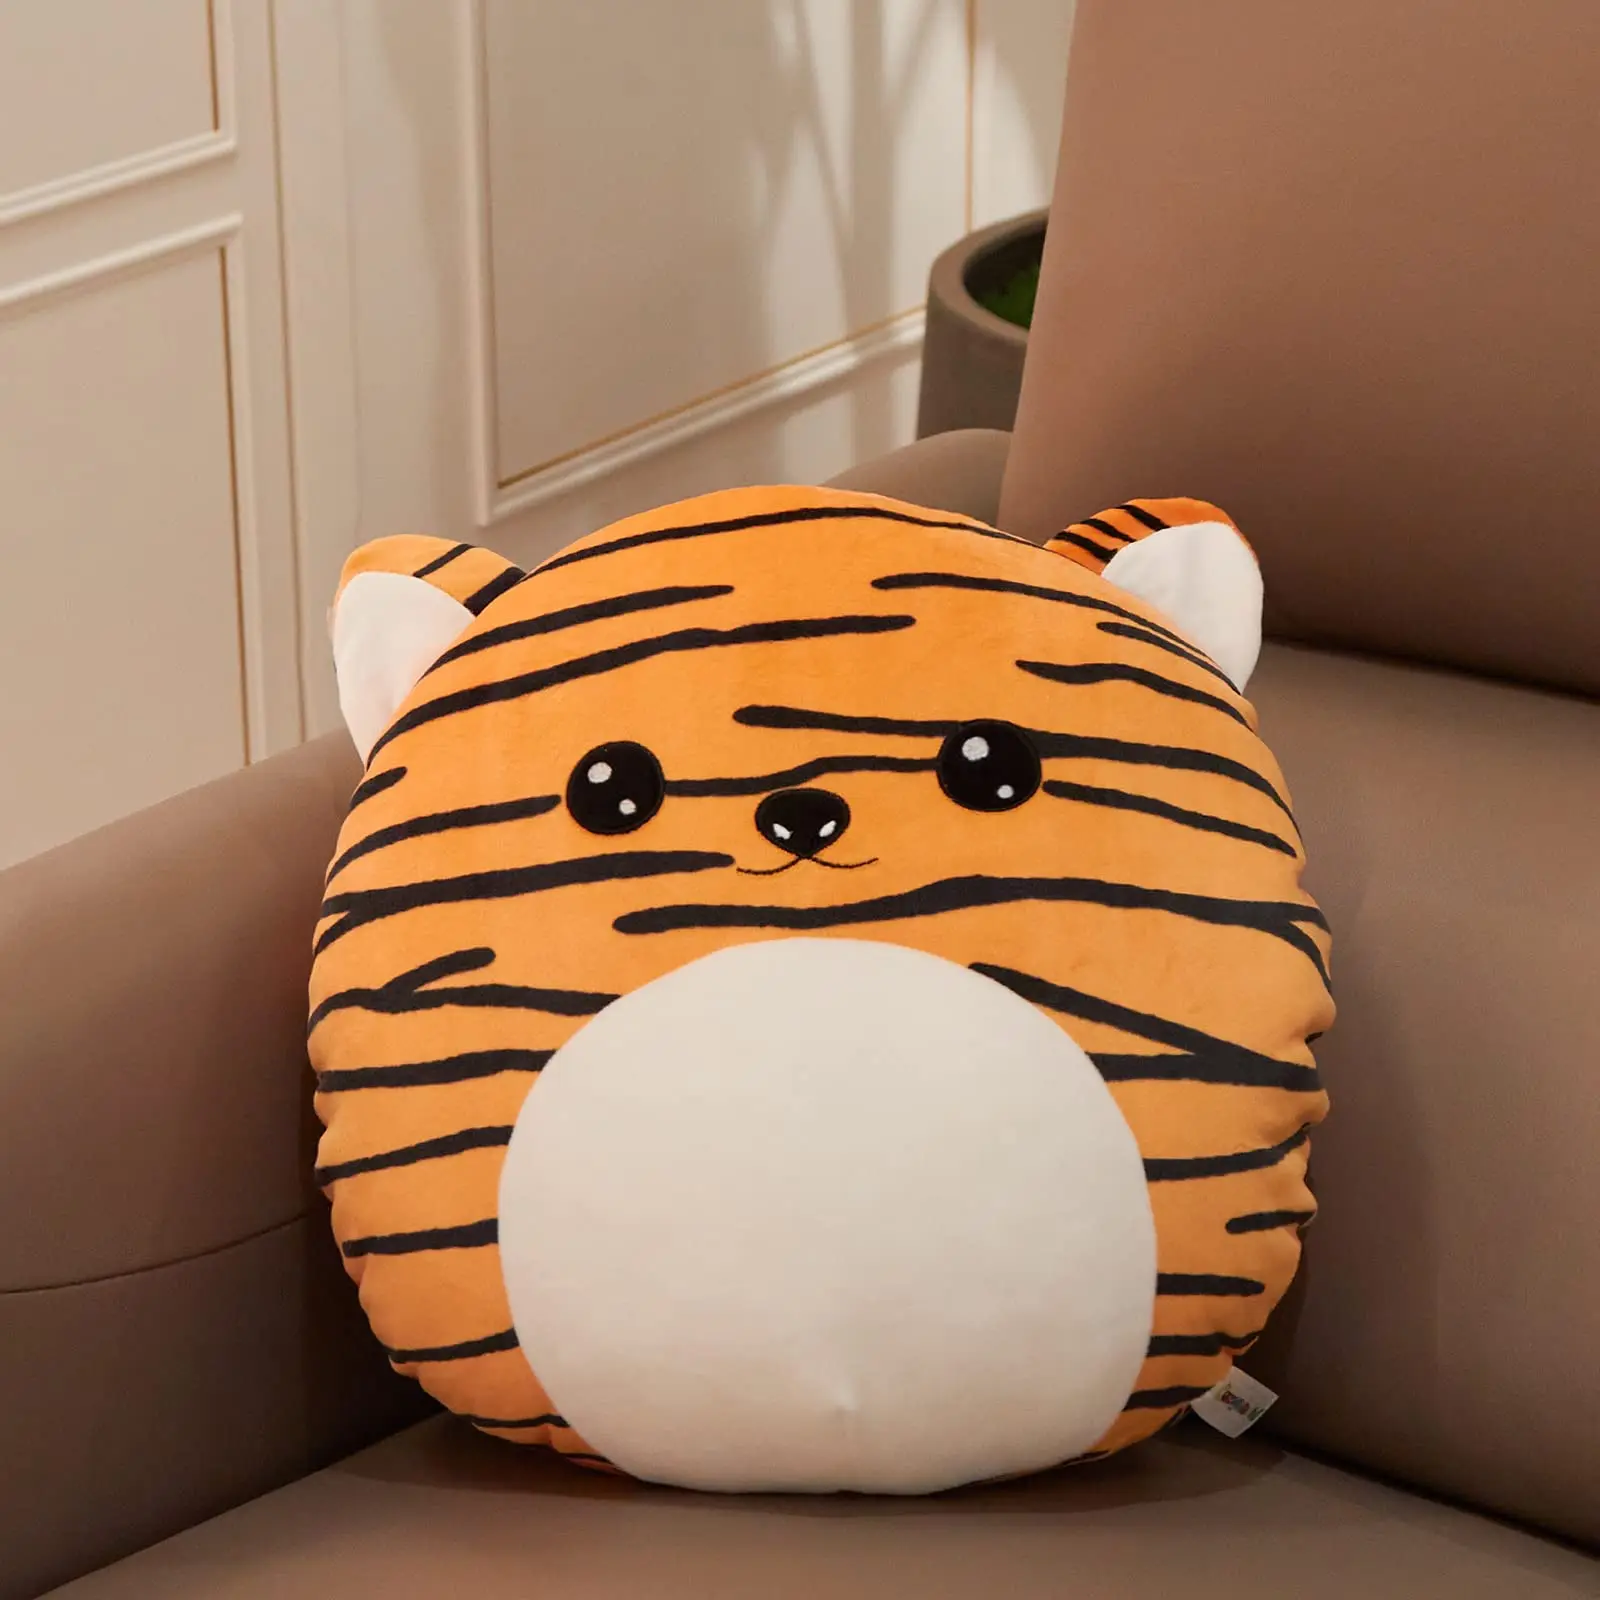 35cm Super Soft Yellow Tiger Throw Pillow Plush Toy Cute Easy to Clean Sleeping Toy Stuffed Animals for Girls Kids Children roller saver cleaner super easy clean tools paint roller spinner brush cleaner for cleaning sleeve dropshipping 1pc upgraded